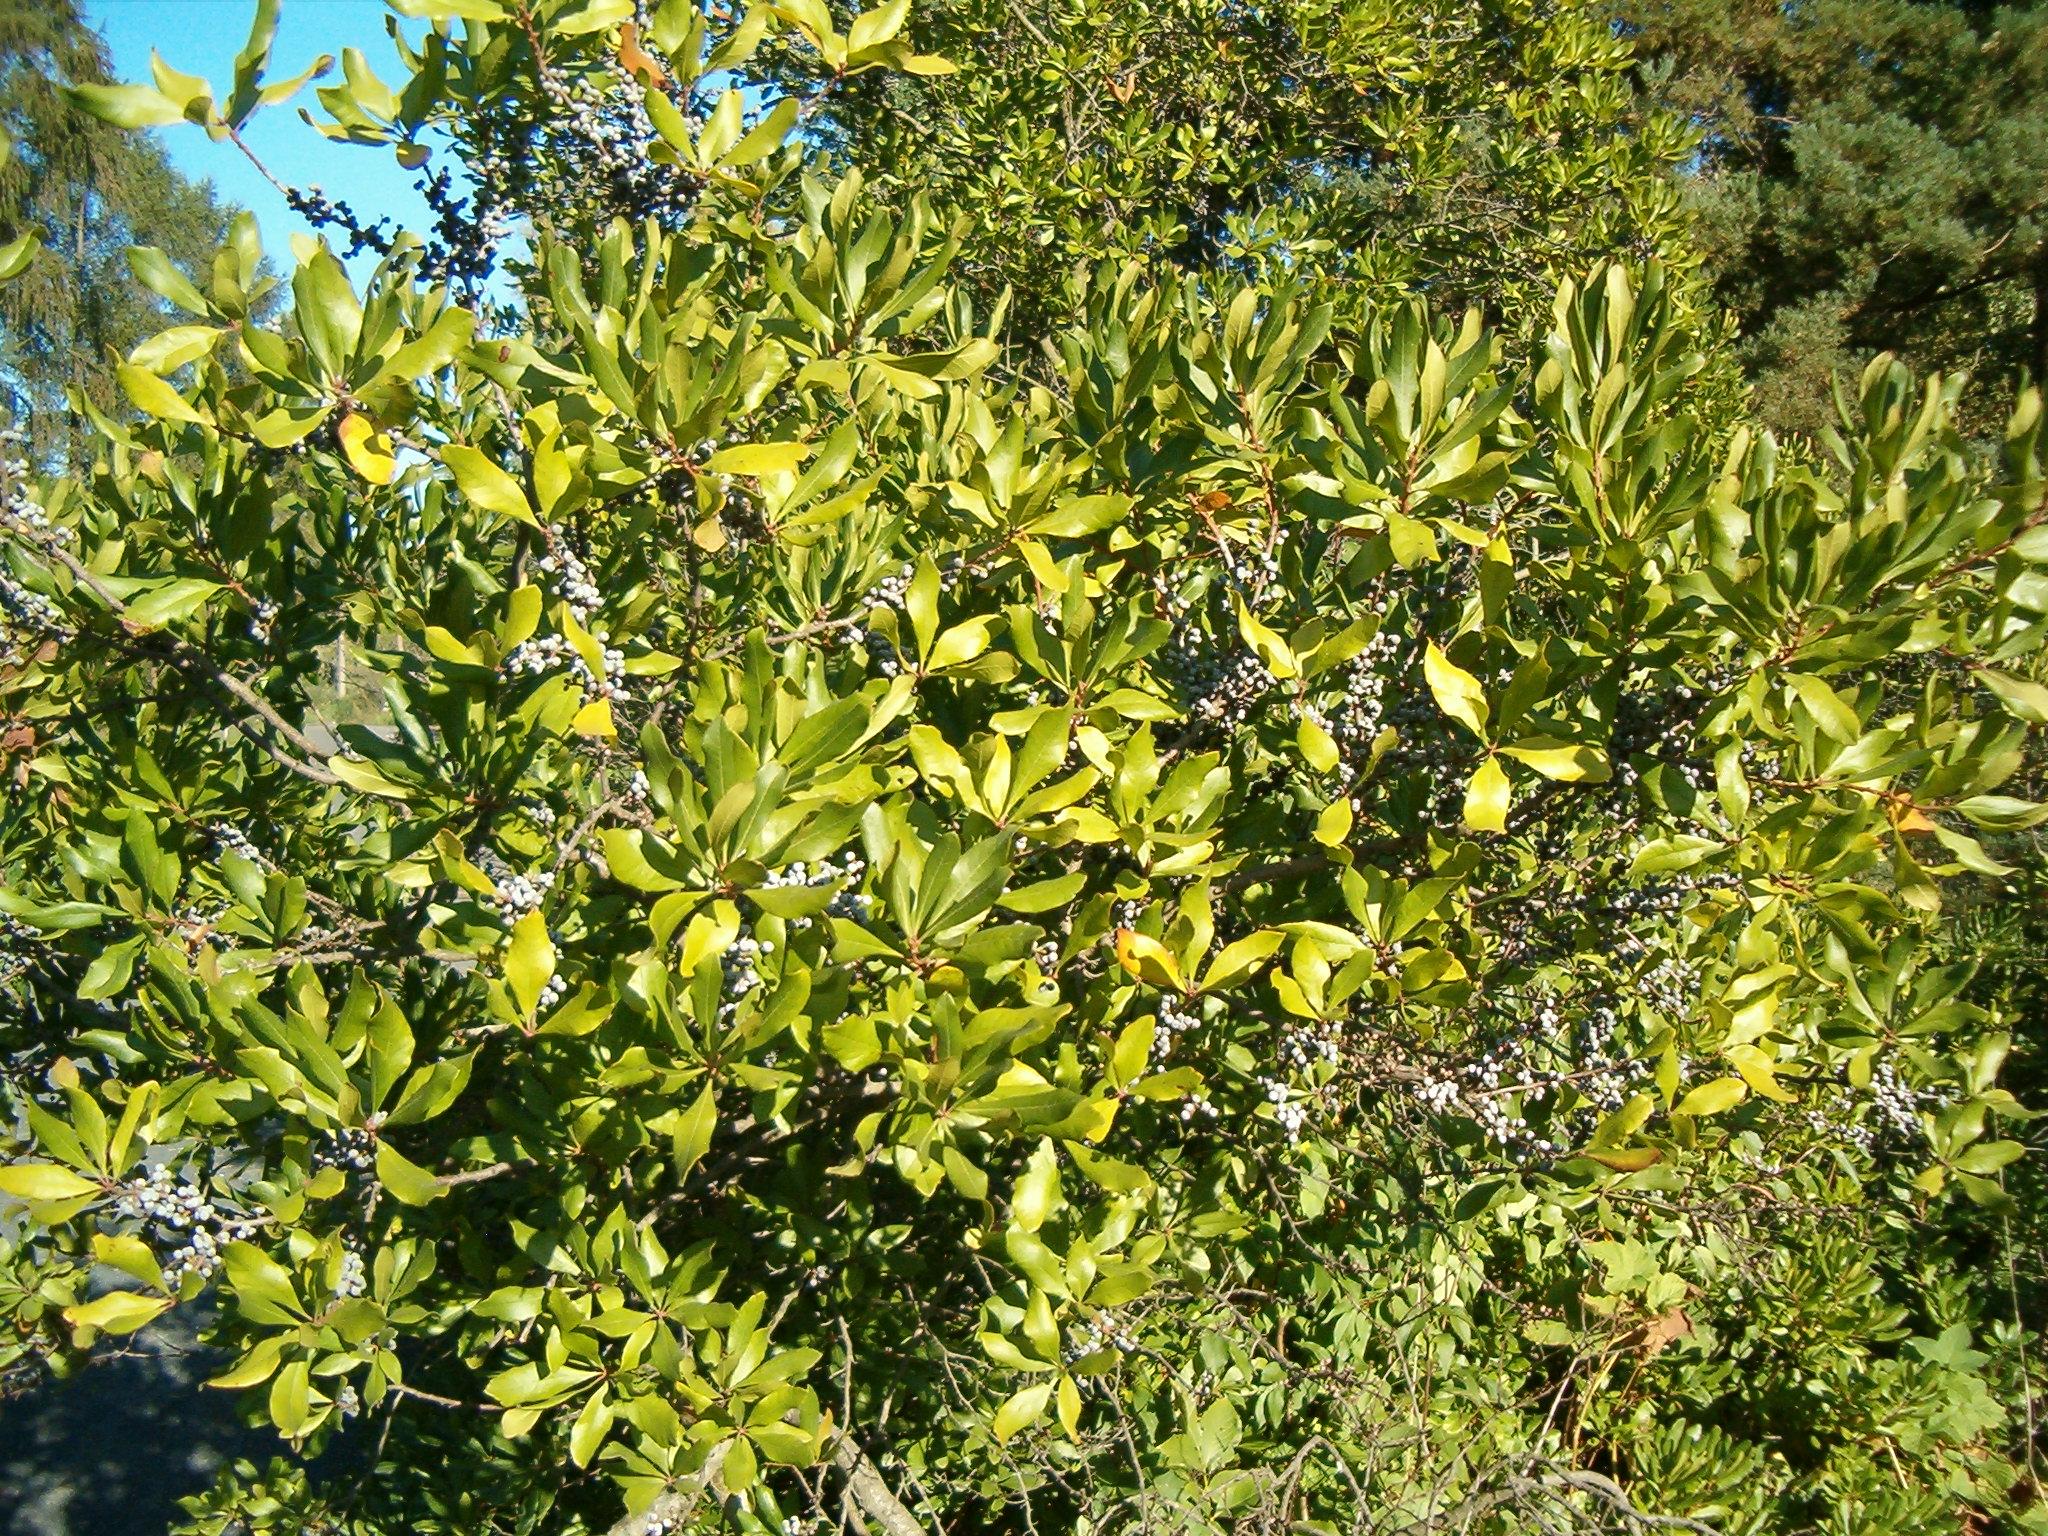 White buds with green leaves, brown stems and yellow midrib.